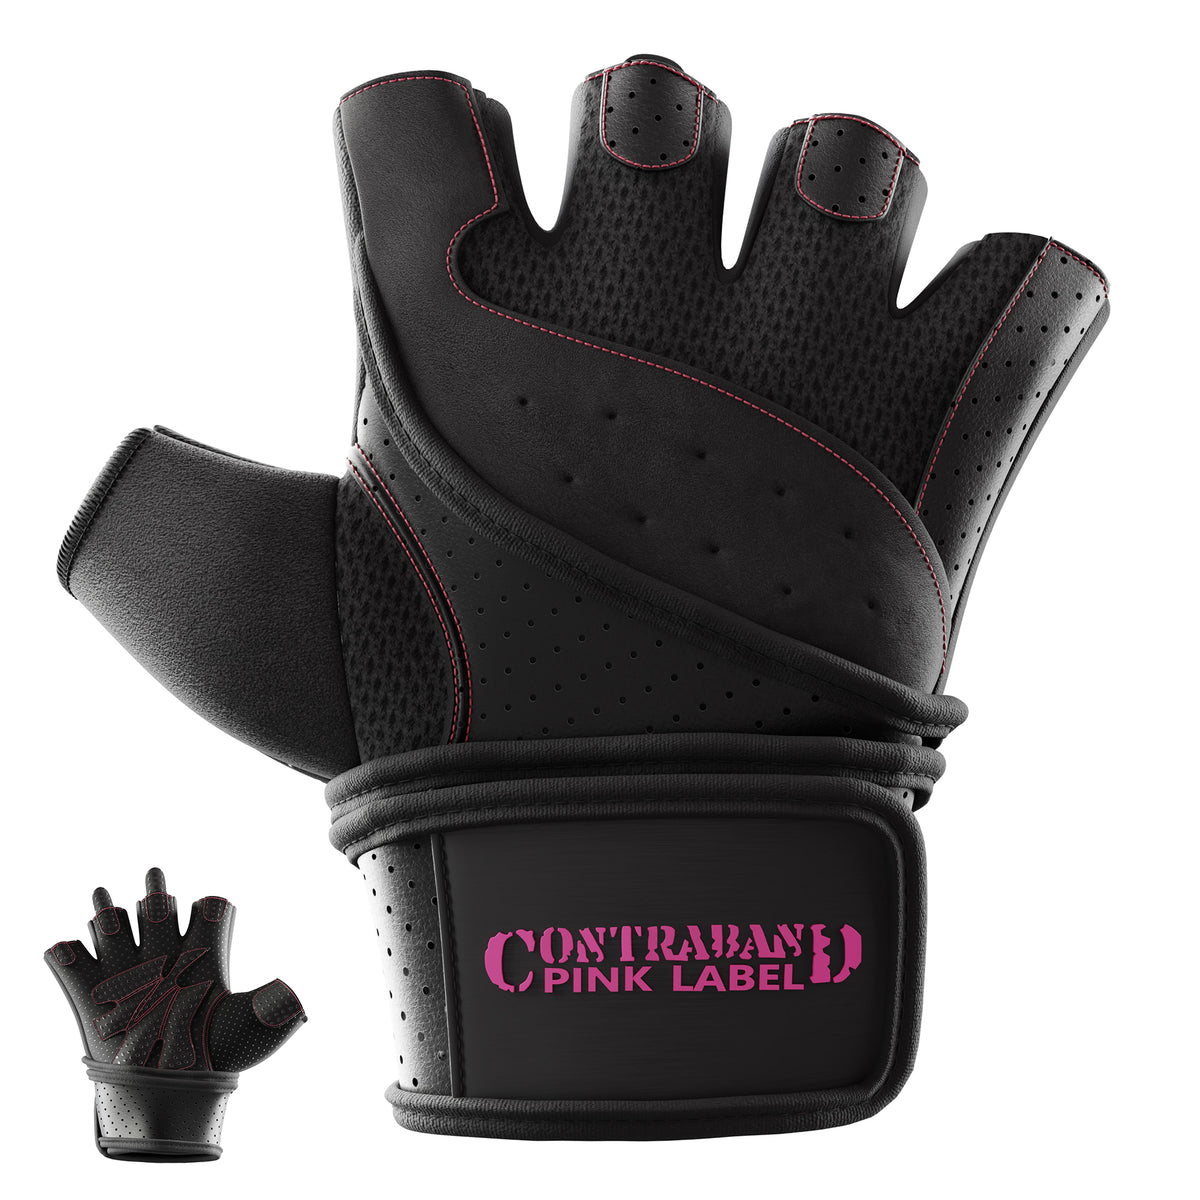 Contraband Pink Label 5737 Womens Padded Wrist Wrap Weight Lifting Gloves w/ GripLock Padding (Pair)